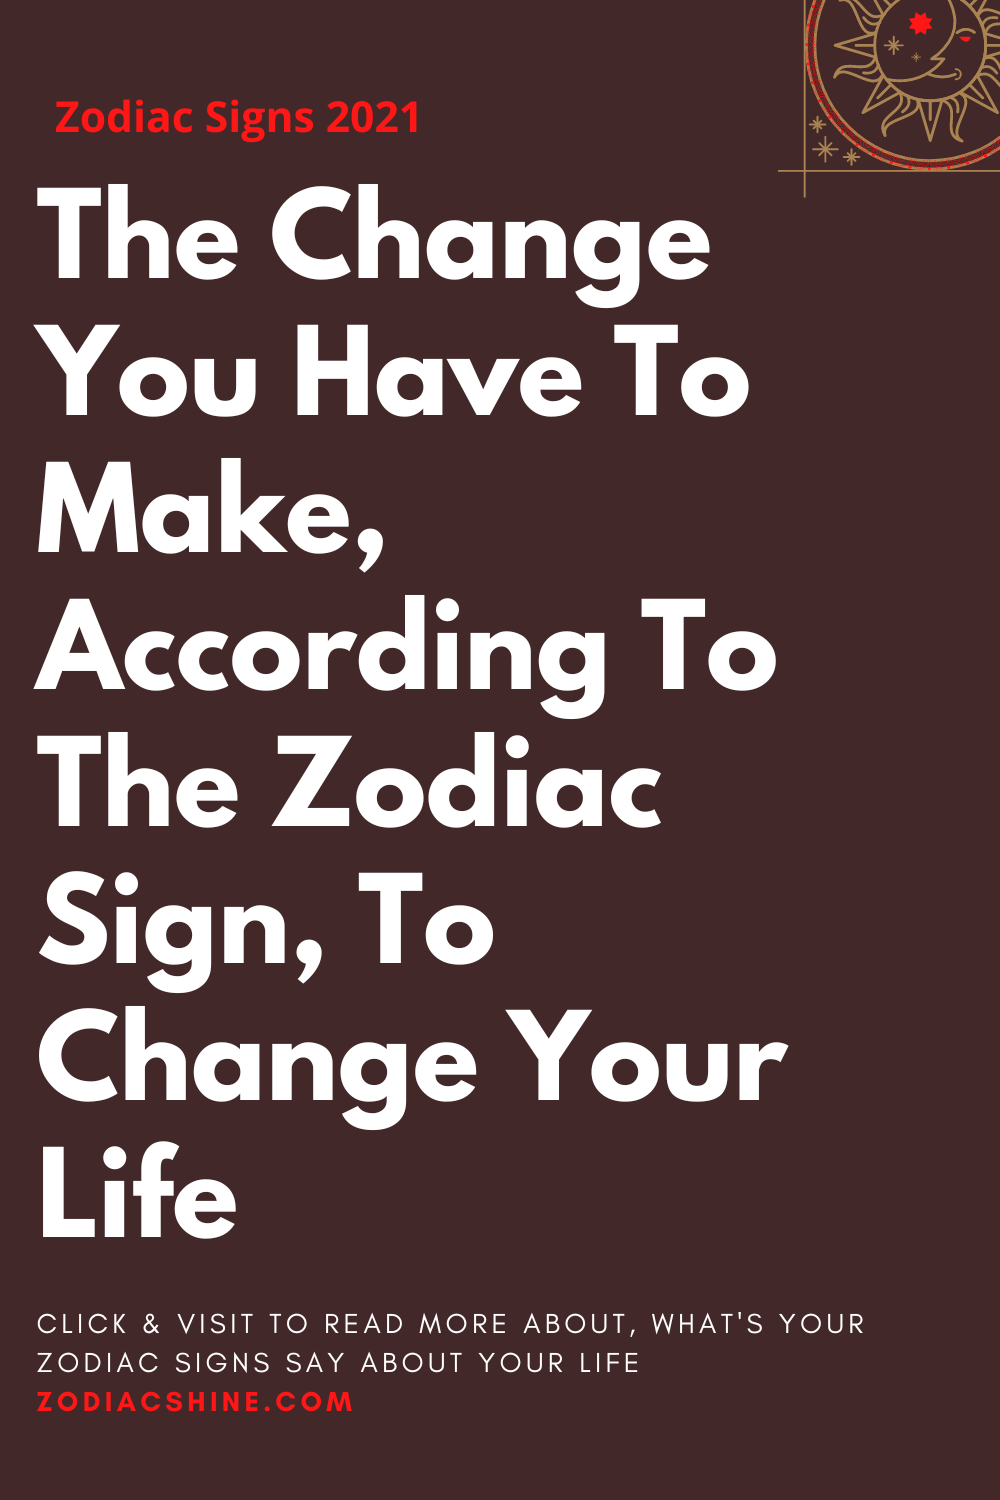 The Change You Have To Make, According To The Zodiac Sign, To Change Your Life